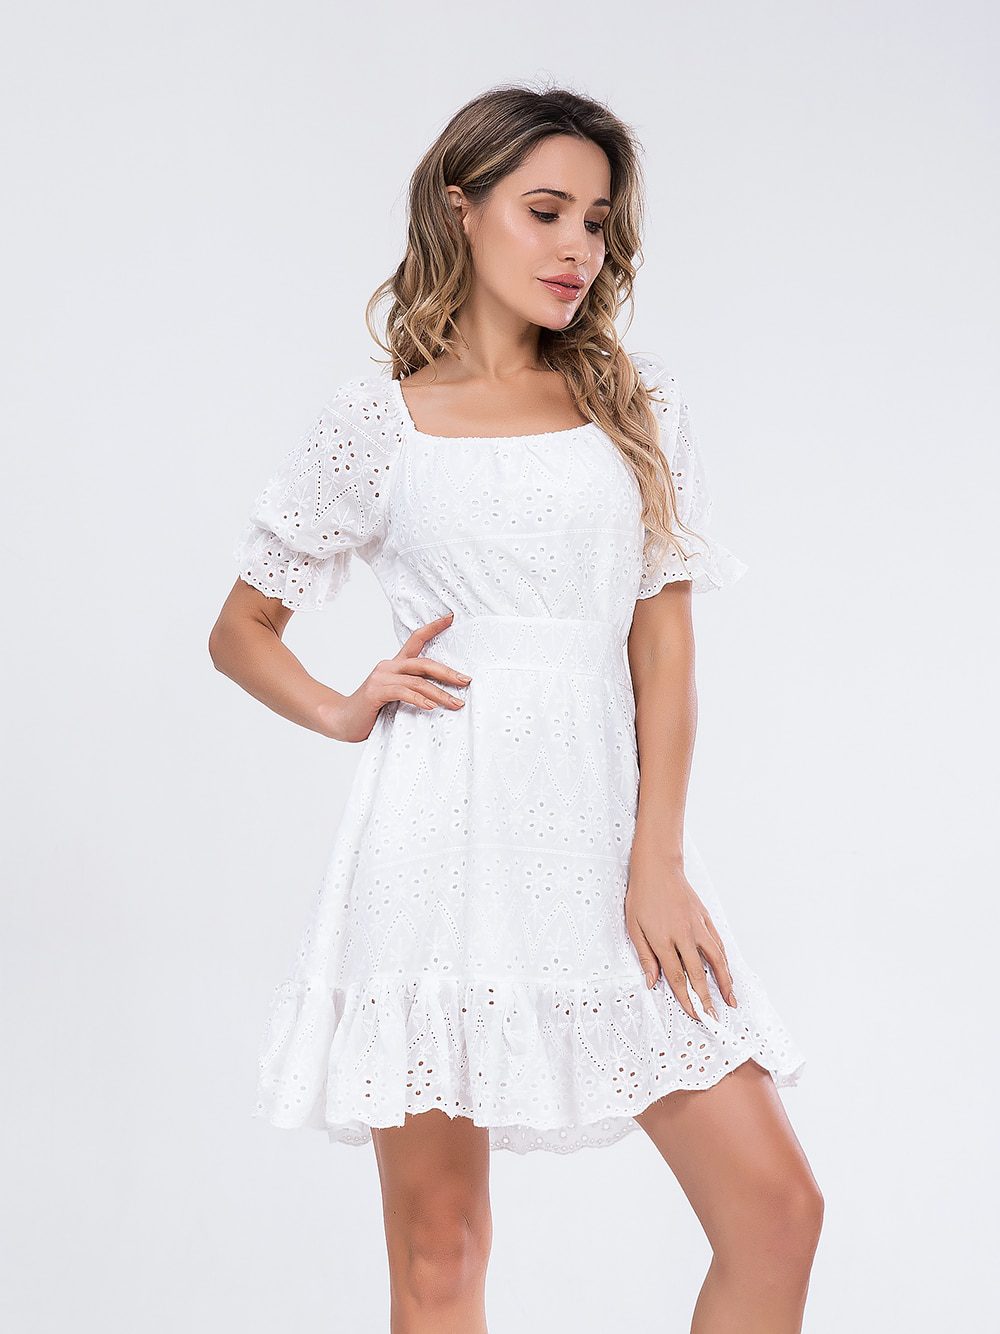 High Waist Ruffled Lace Up Hollow Out A-Line White Mini Dress in Dresses